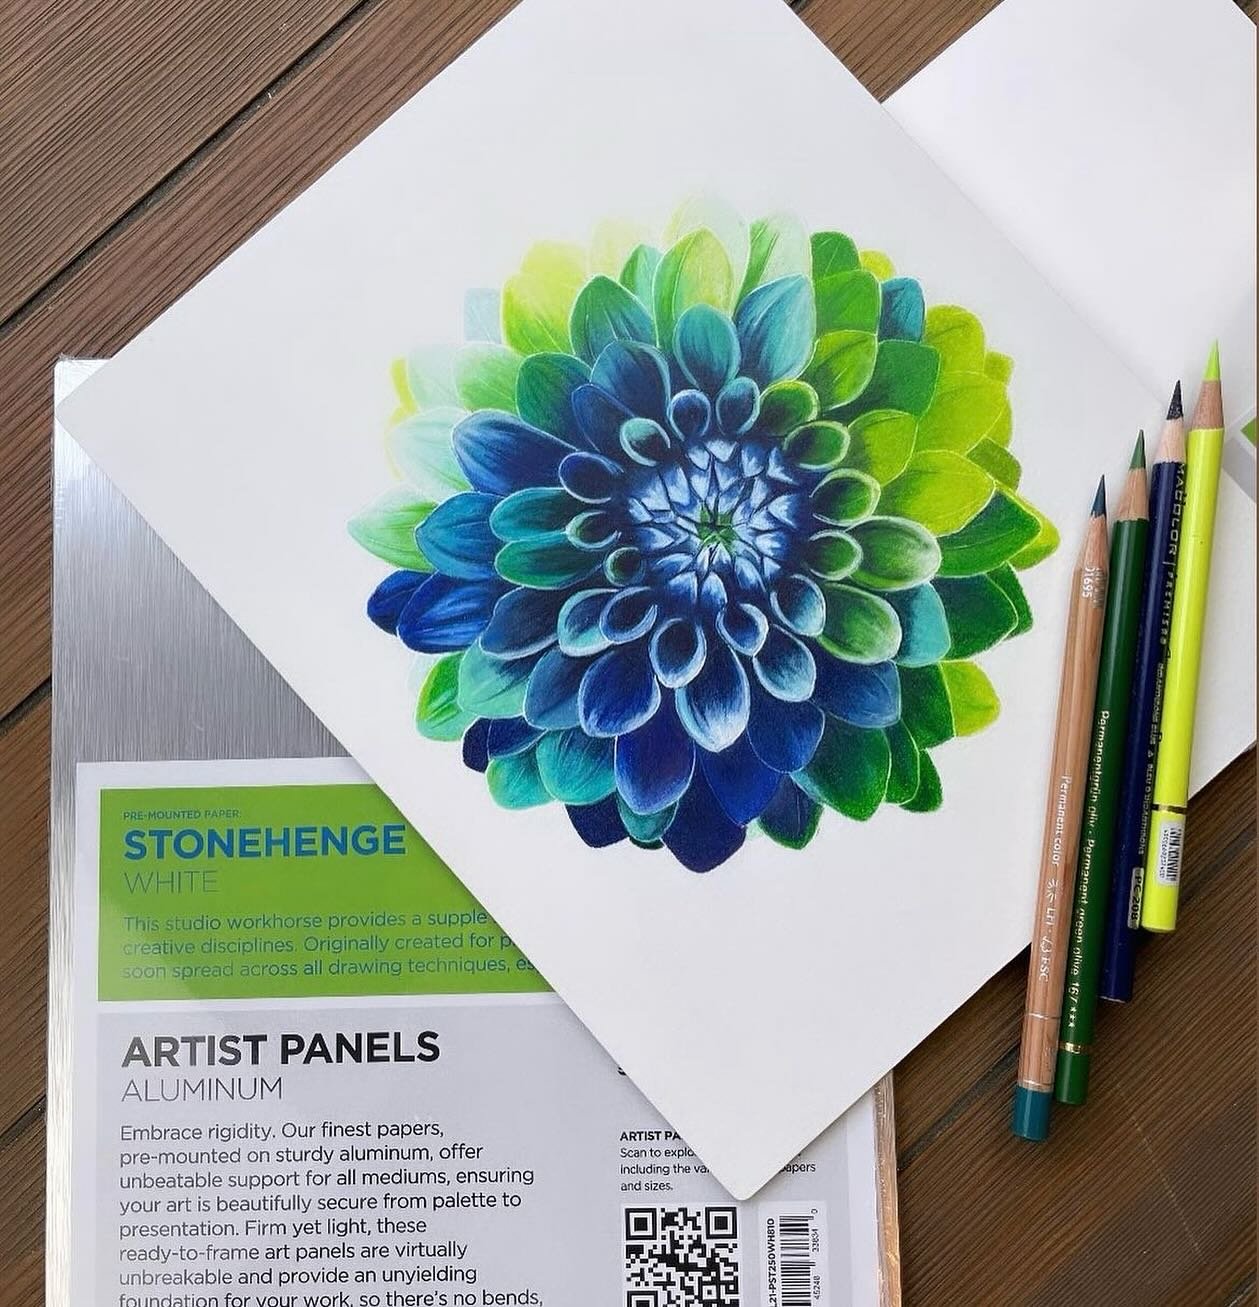 @jennifermorrisonart drawing a Dahlia on our new Stonehenge Artist Panel! 🌼 

&ldquo;The aluminum panel made it so I could draw directly on my desk which isn&rsquo;t a smooth surface. The paper quality was great. Very similar to what I am used to wi